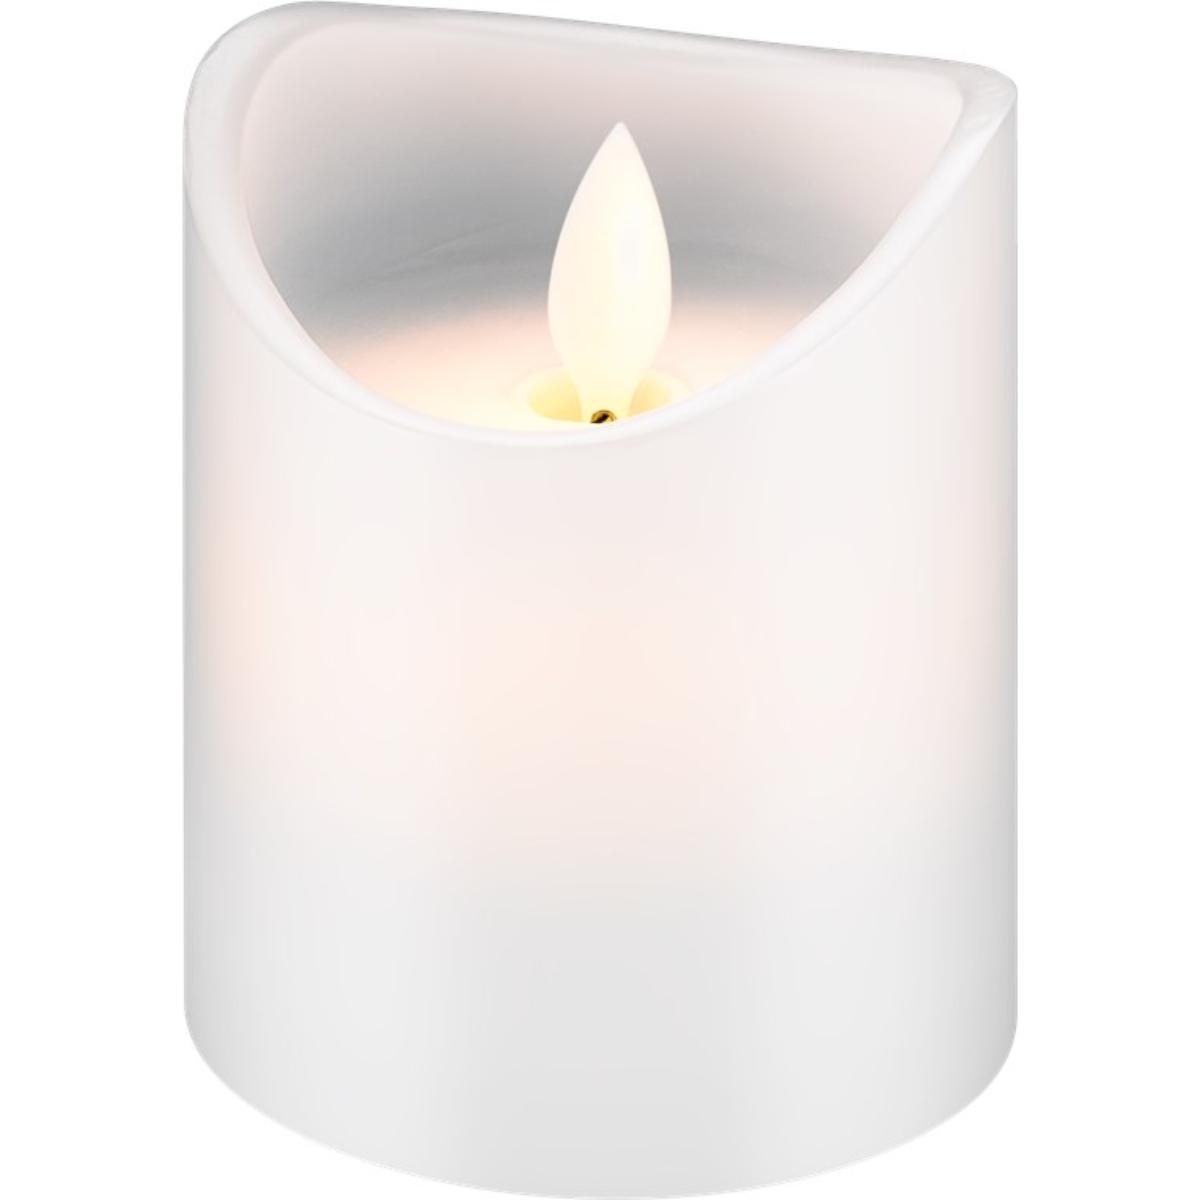 LED white real wax candle, 7.5 x 10 cm beautiful and safe lighting sol